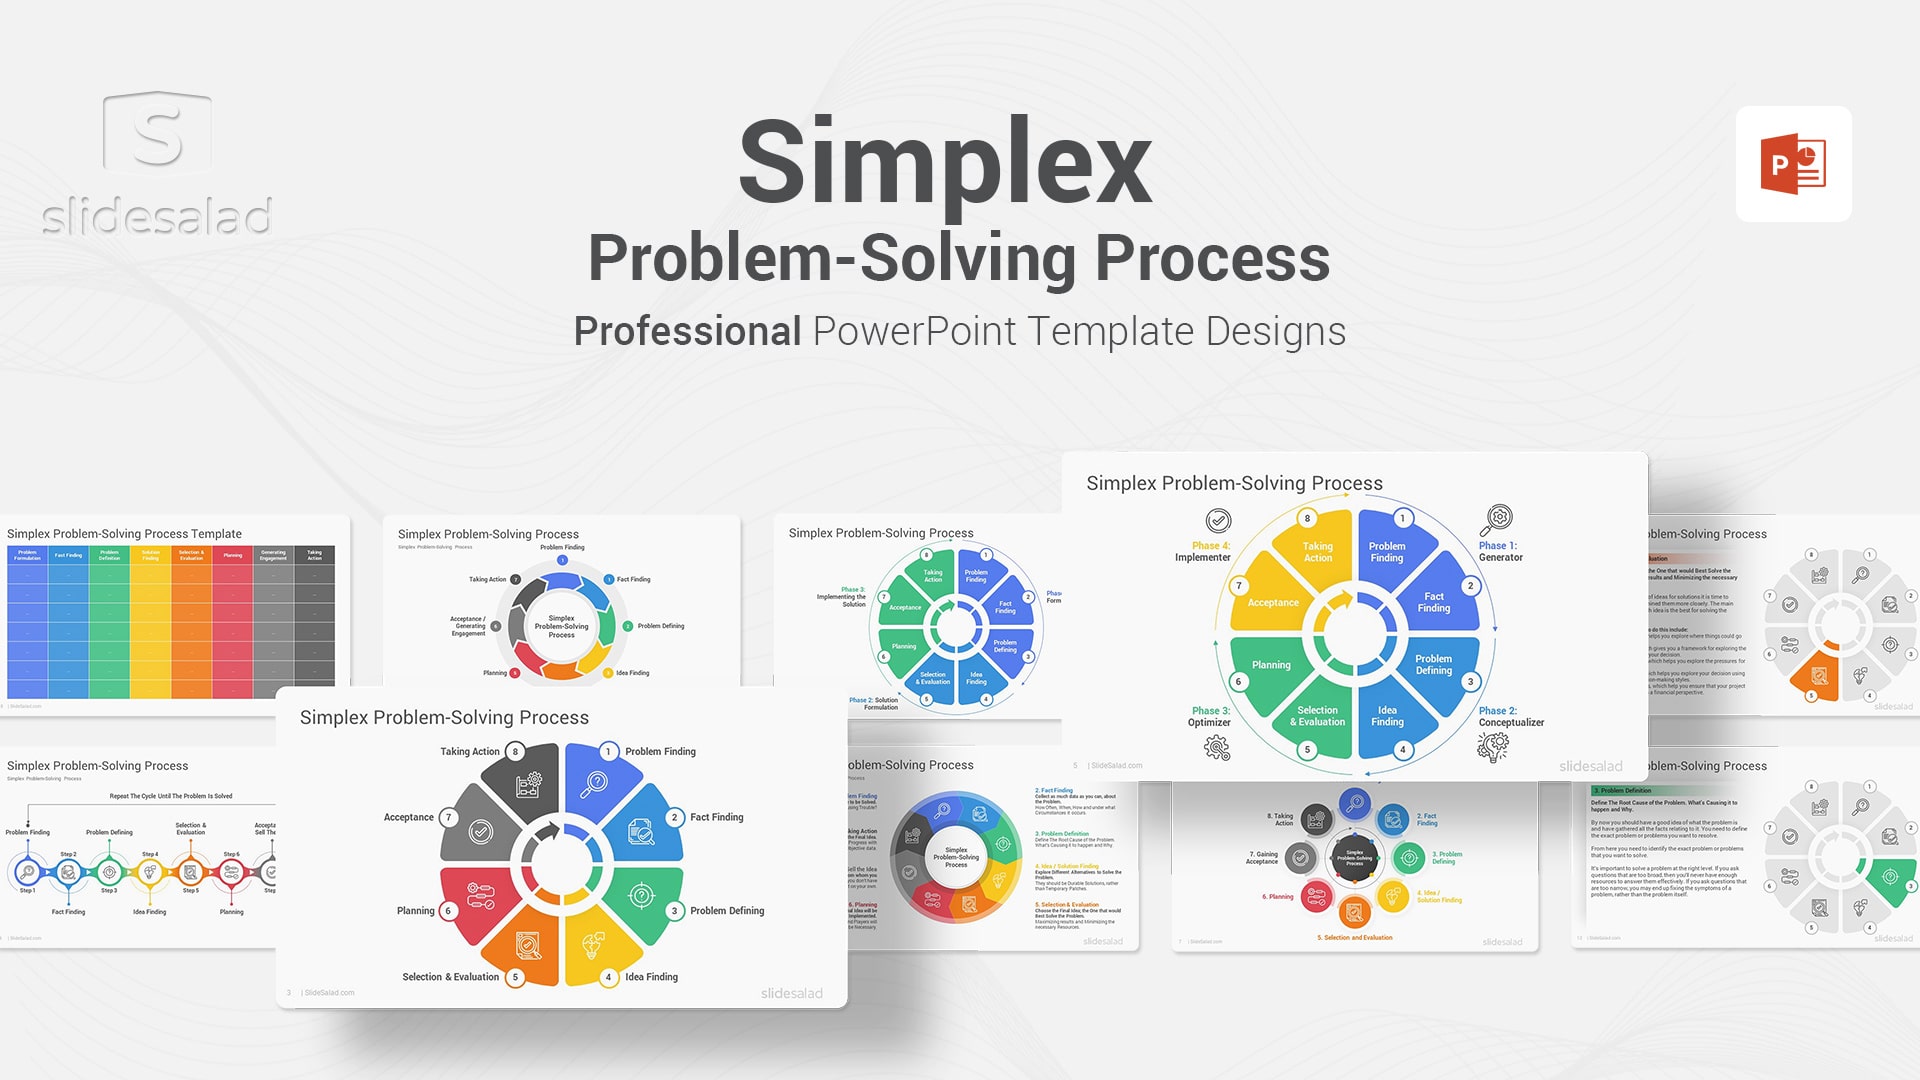 Simplex Problem-Solving Process PowerPoint Template - Professional Presentation Examples of Simplifying Complex Problems with the Simplex Method